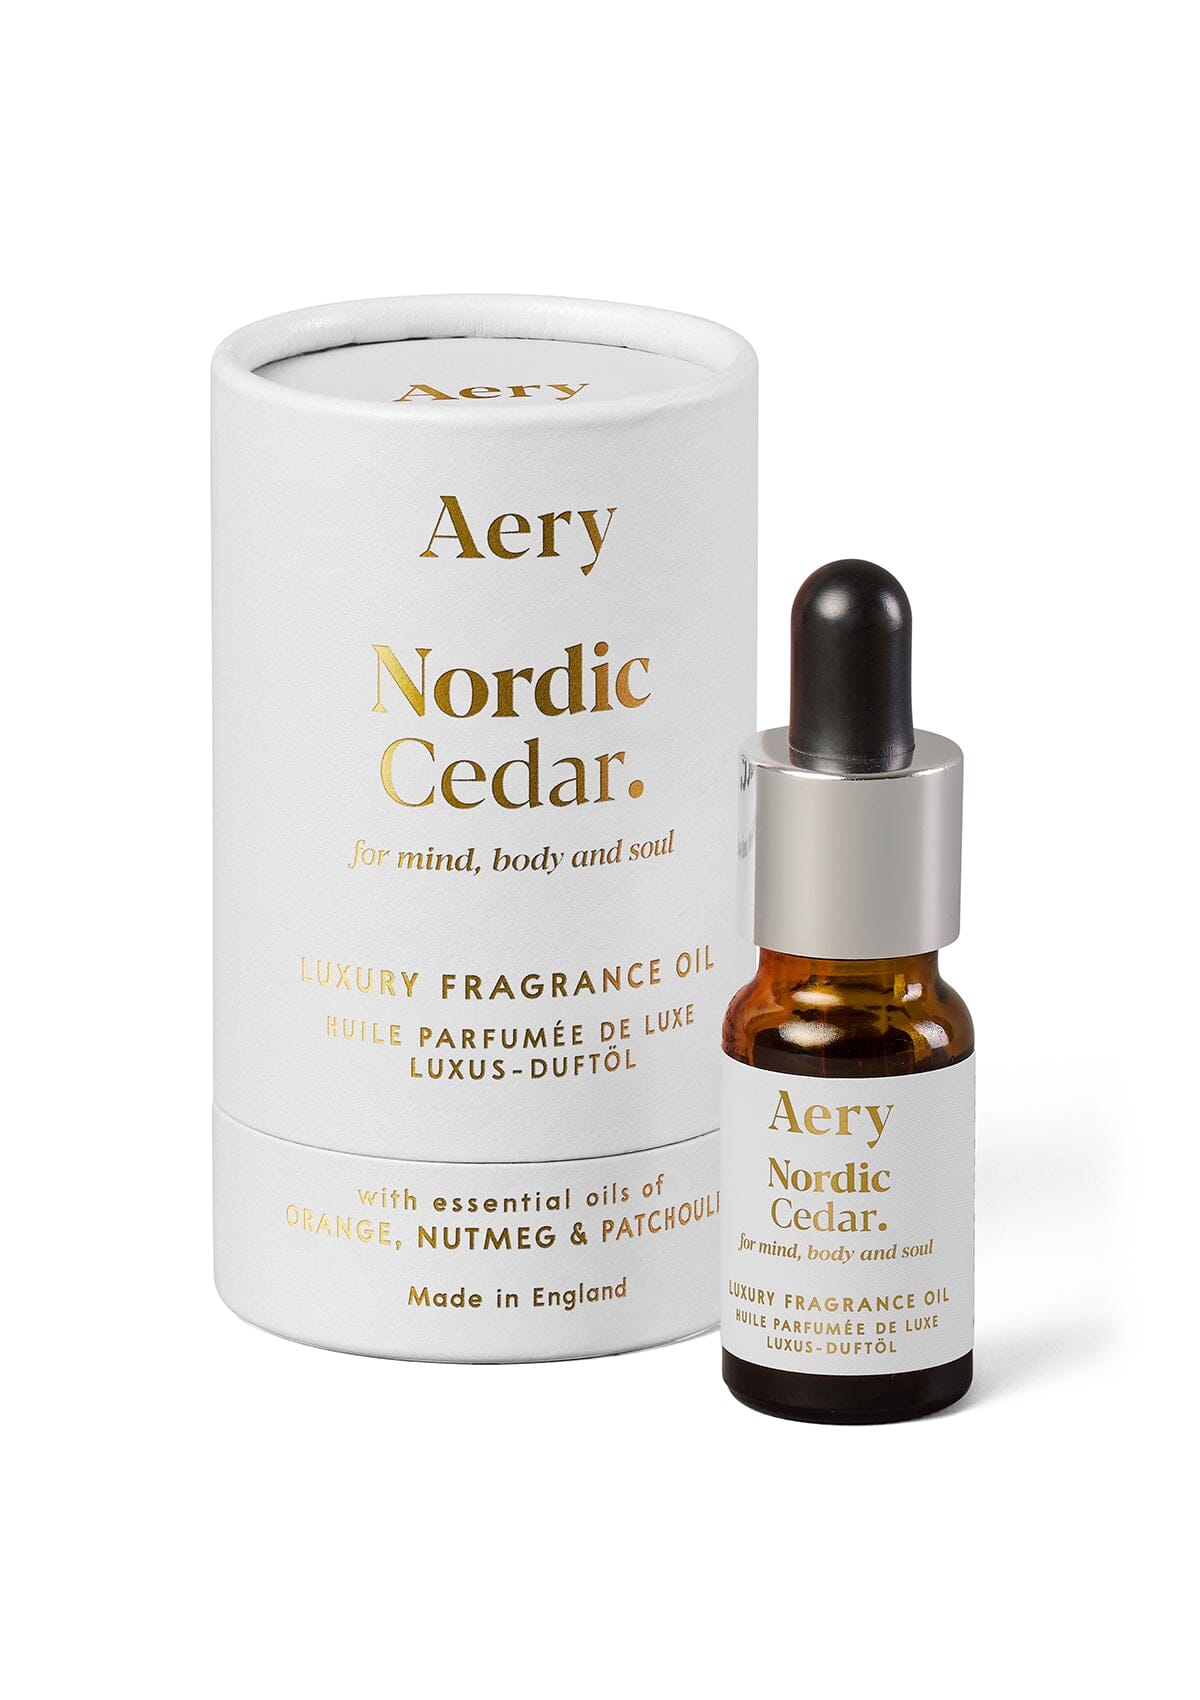 White Nordic Cedar fragrance oil displayed next to product packaging by Aery on white background 